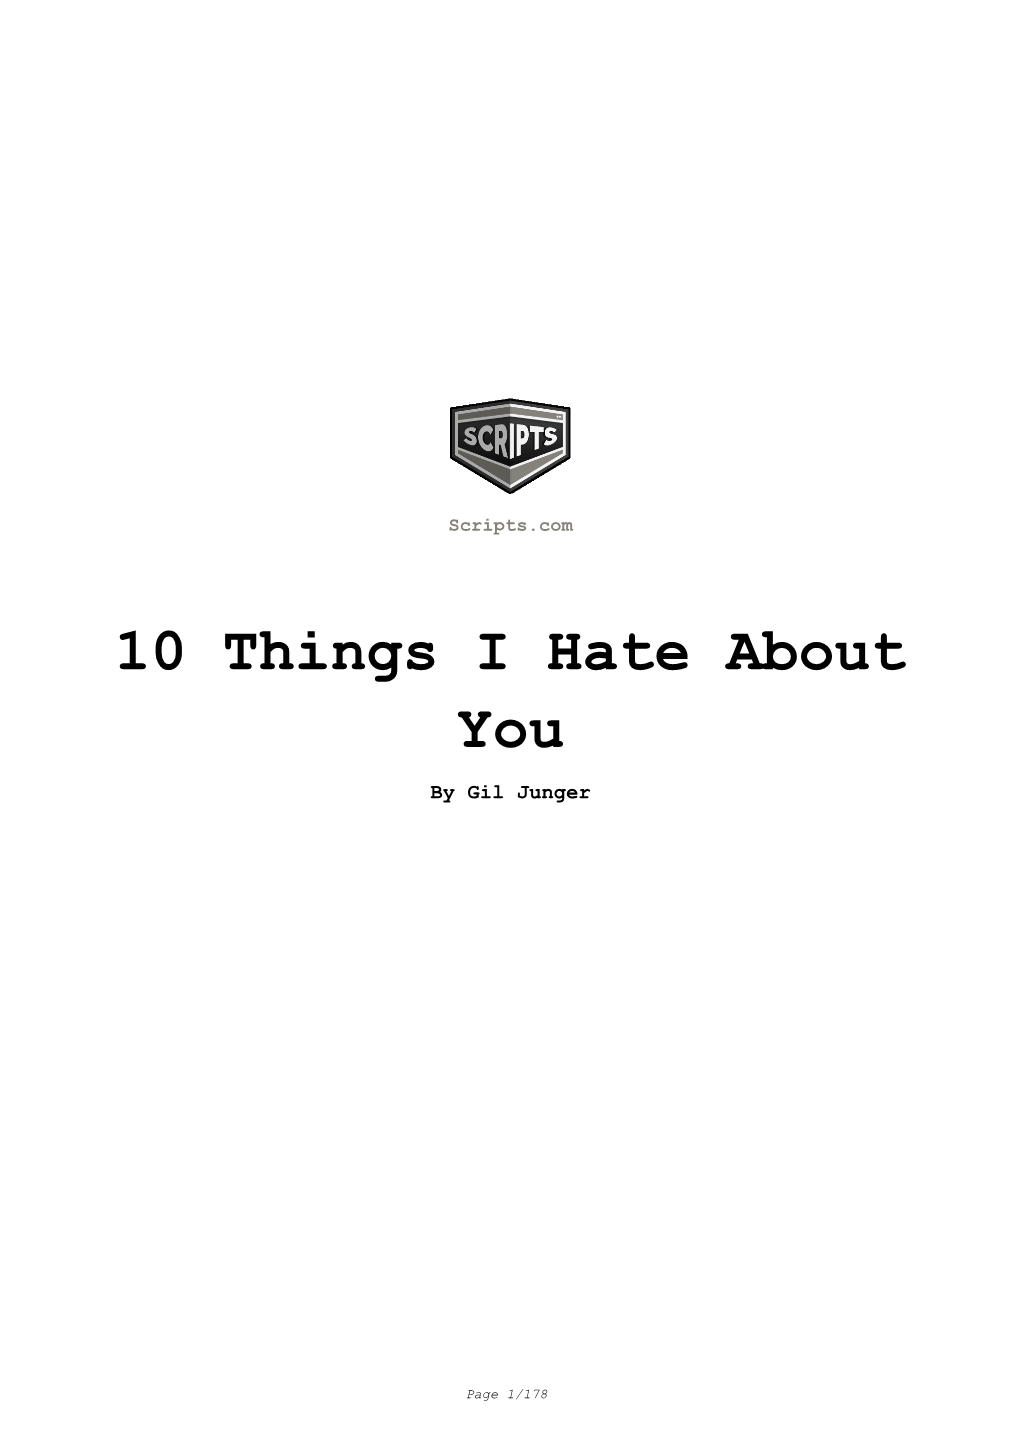 10 Things I Hate About You Movie Script in PDF Format